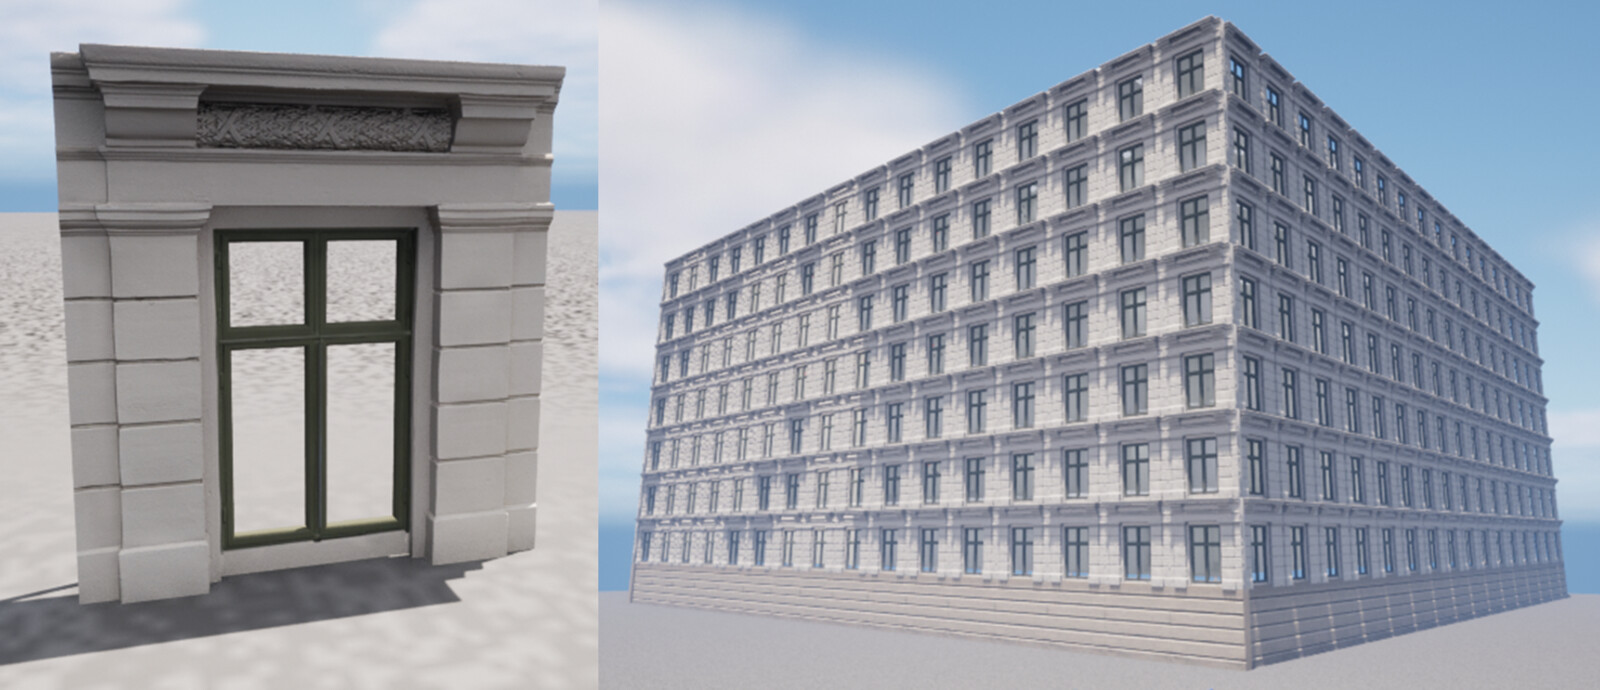 This method is best if you just want to use a few segments of a wall mesh to make a whole building.